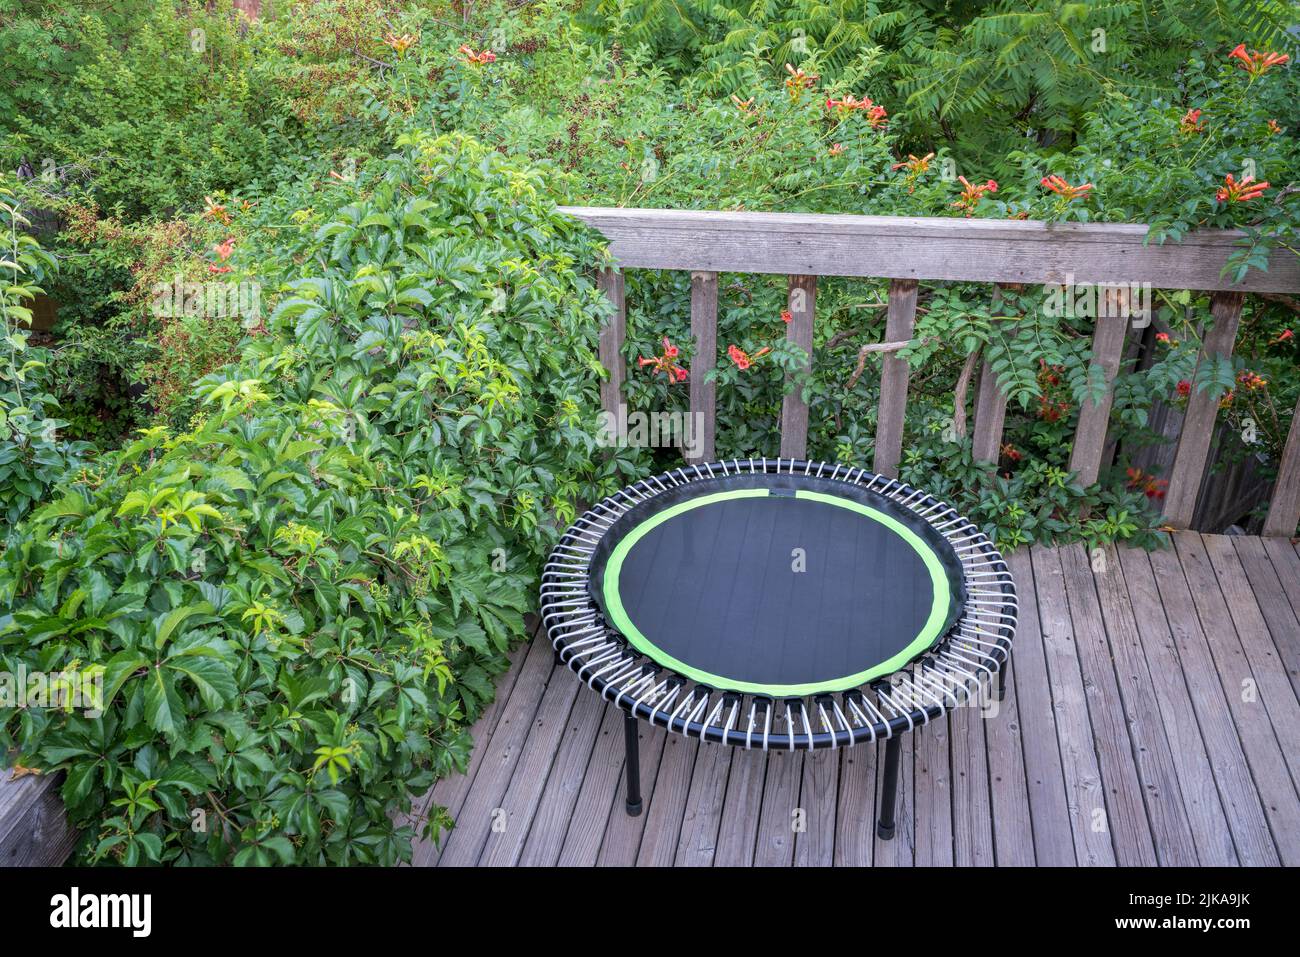 mini trampoline for fitness exercising and rebounding in a backyard patio Stock Photo